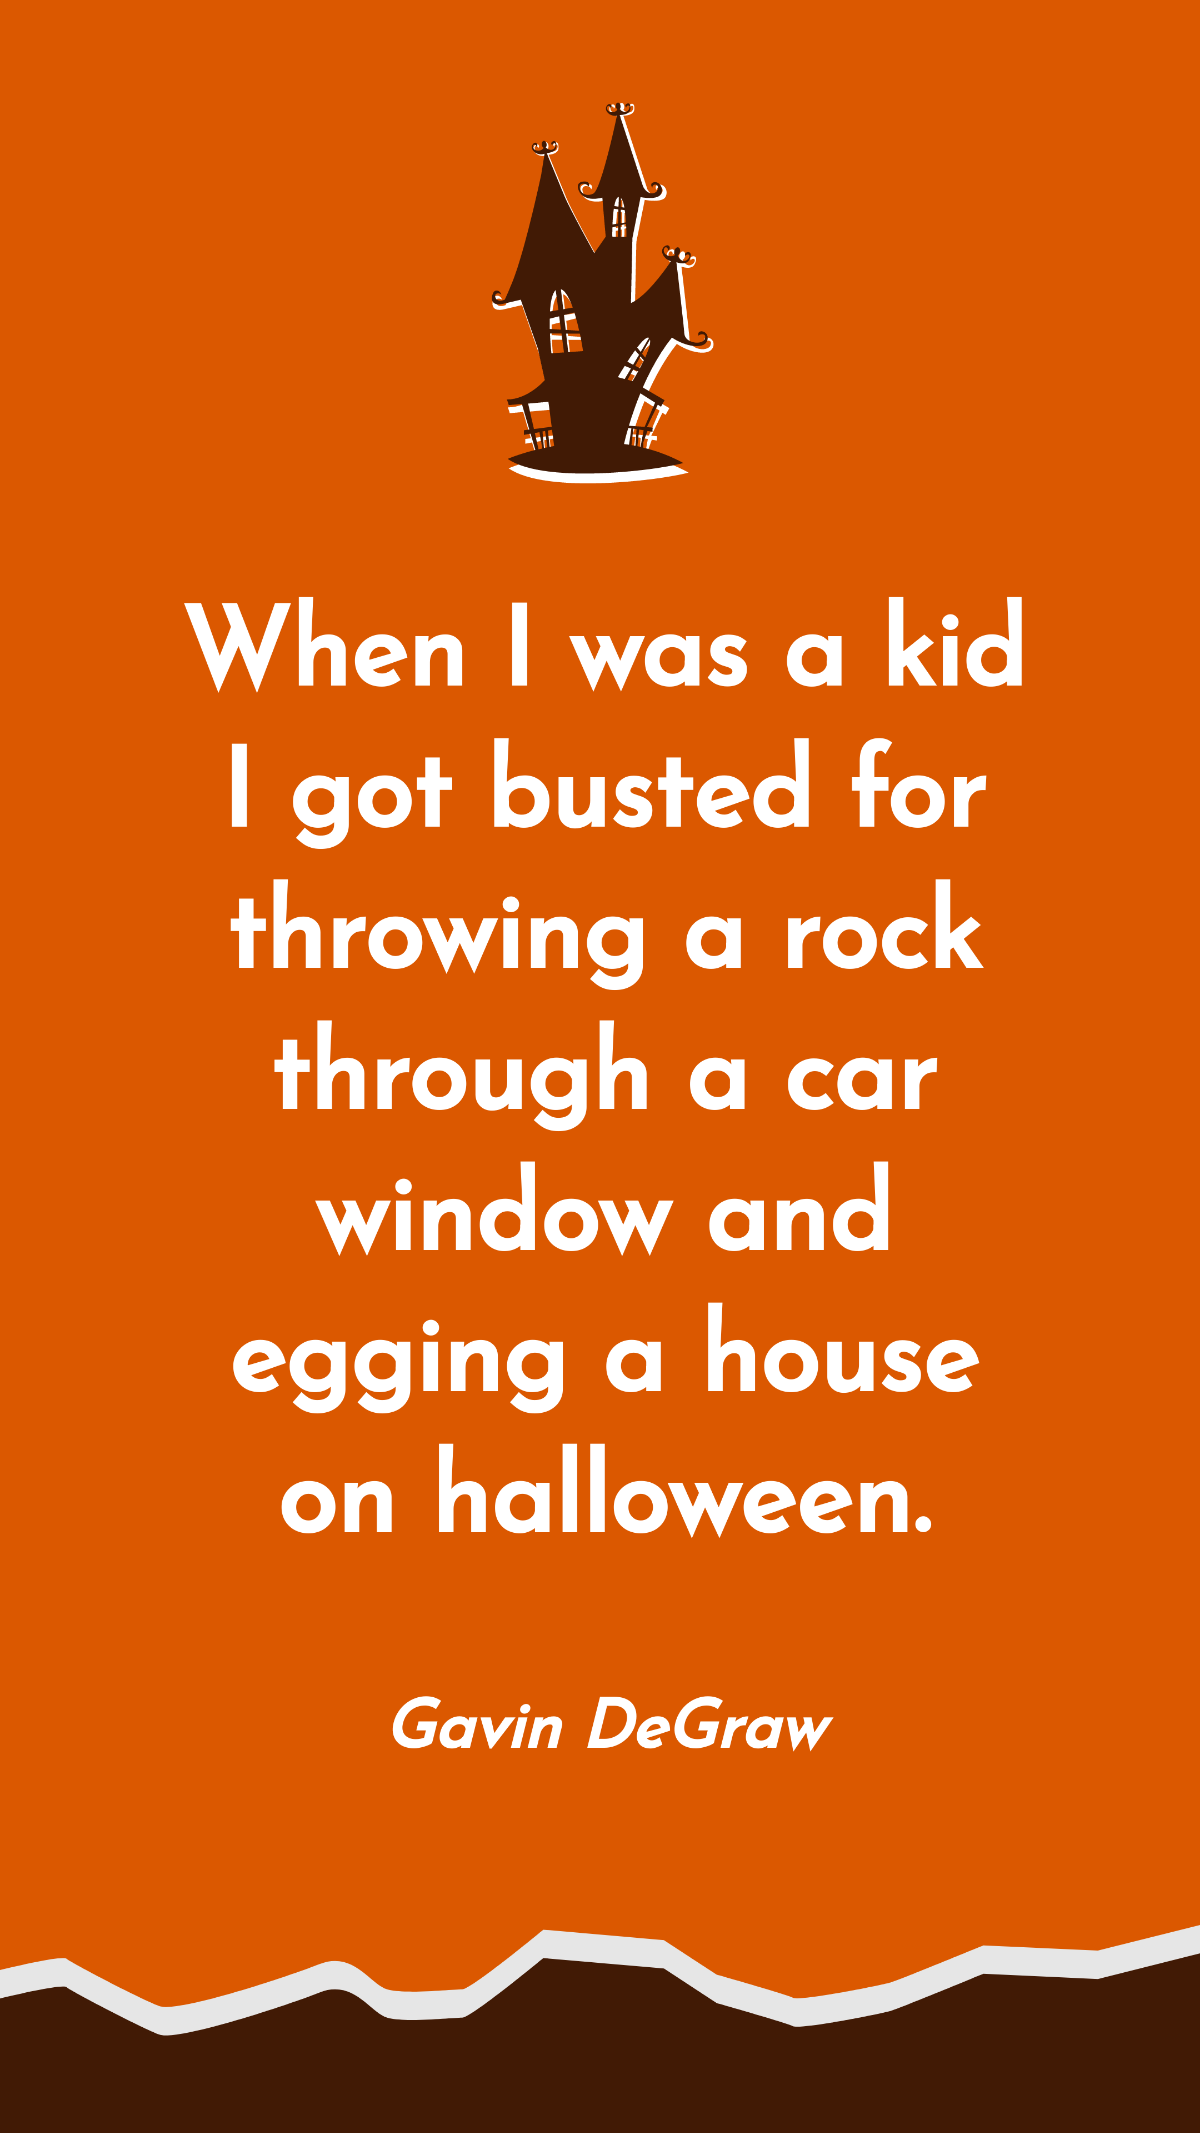 Gavin DeGraw - When I was a kid I got busted for throwing a rock through a car window and egging a house on halloween. Template